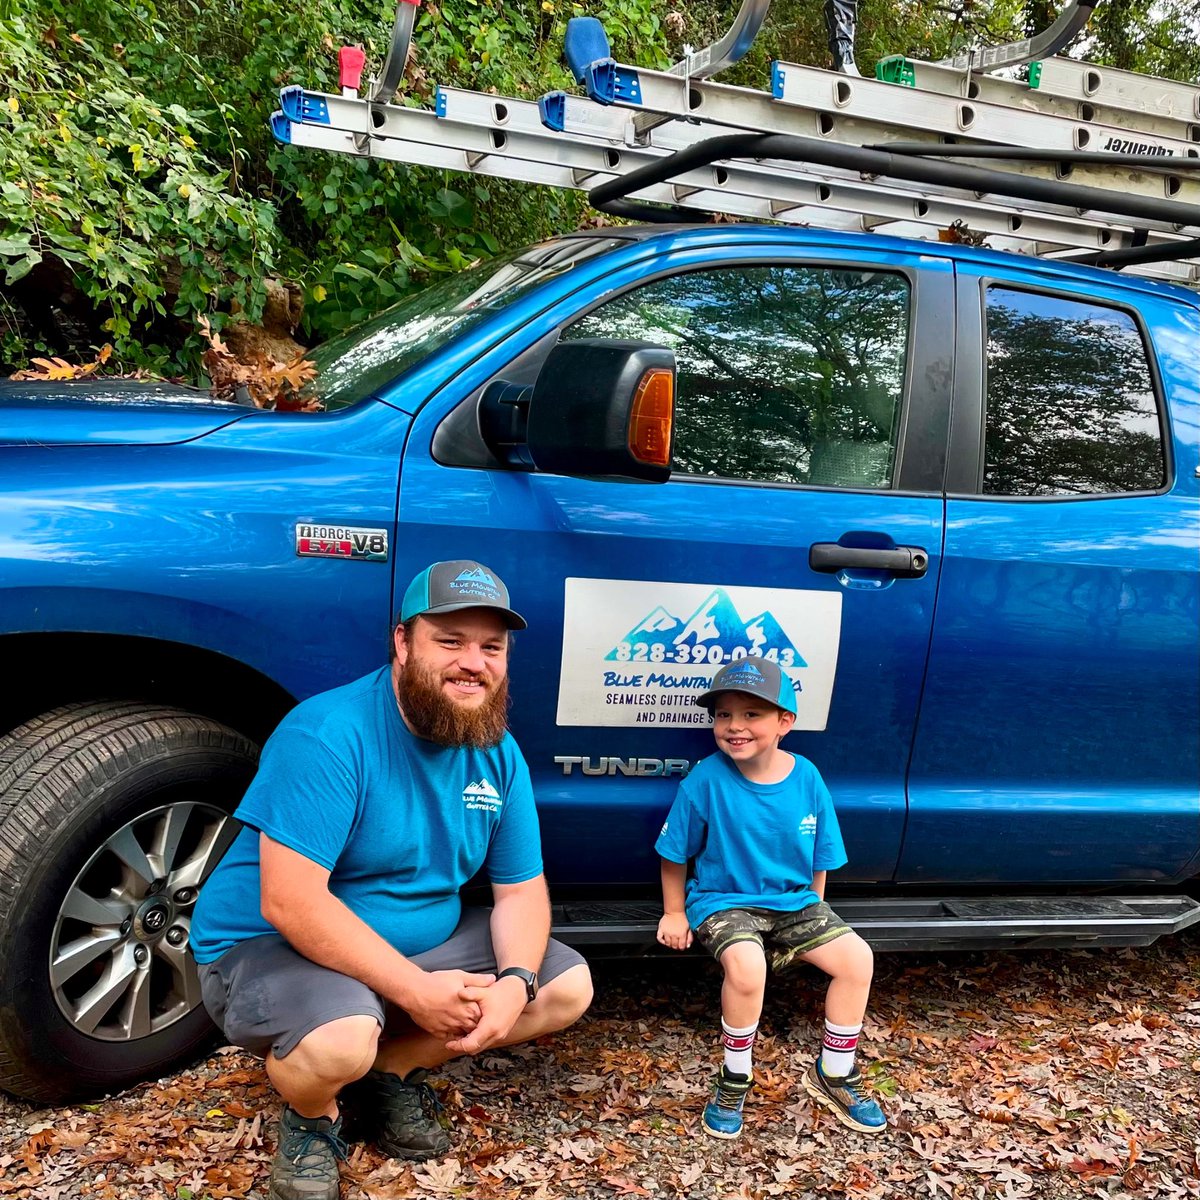 A little #flashbackfriday!  Kids grow up so fast. Don’t let the fleeting moments escape.

#fatherson #familygoals #familybusiness #localbusiness #gutters #construction #contractor #timeflies #love #asheville #northcarolina #wnc